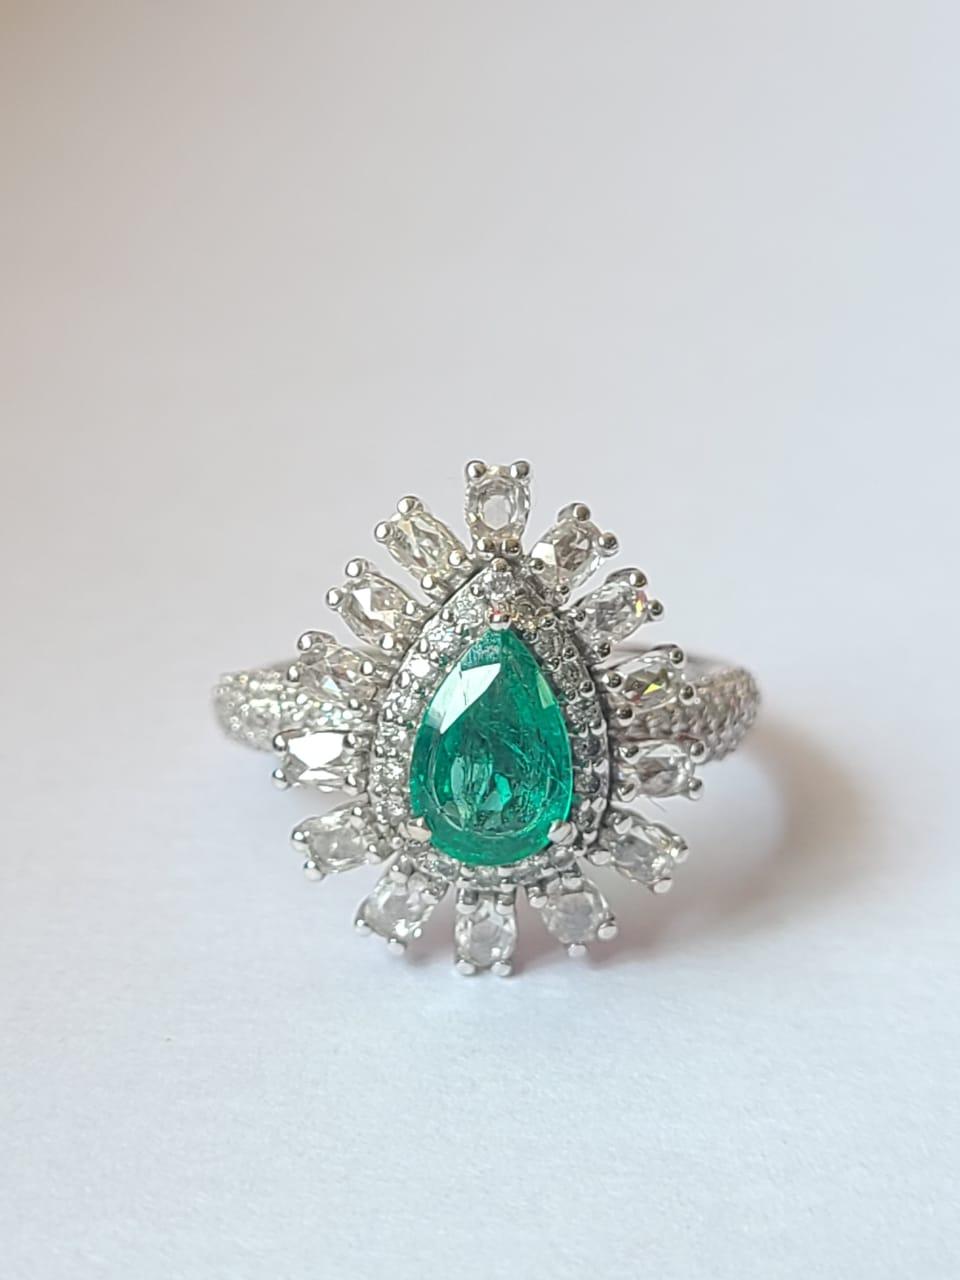 Natural Zambian Emerald & Rose Cut Diamonds Engagement Ring Set in 18K Gold For Sale 1